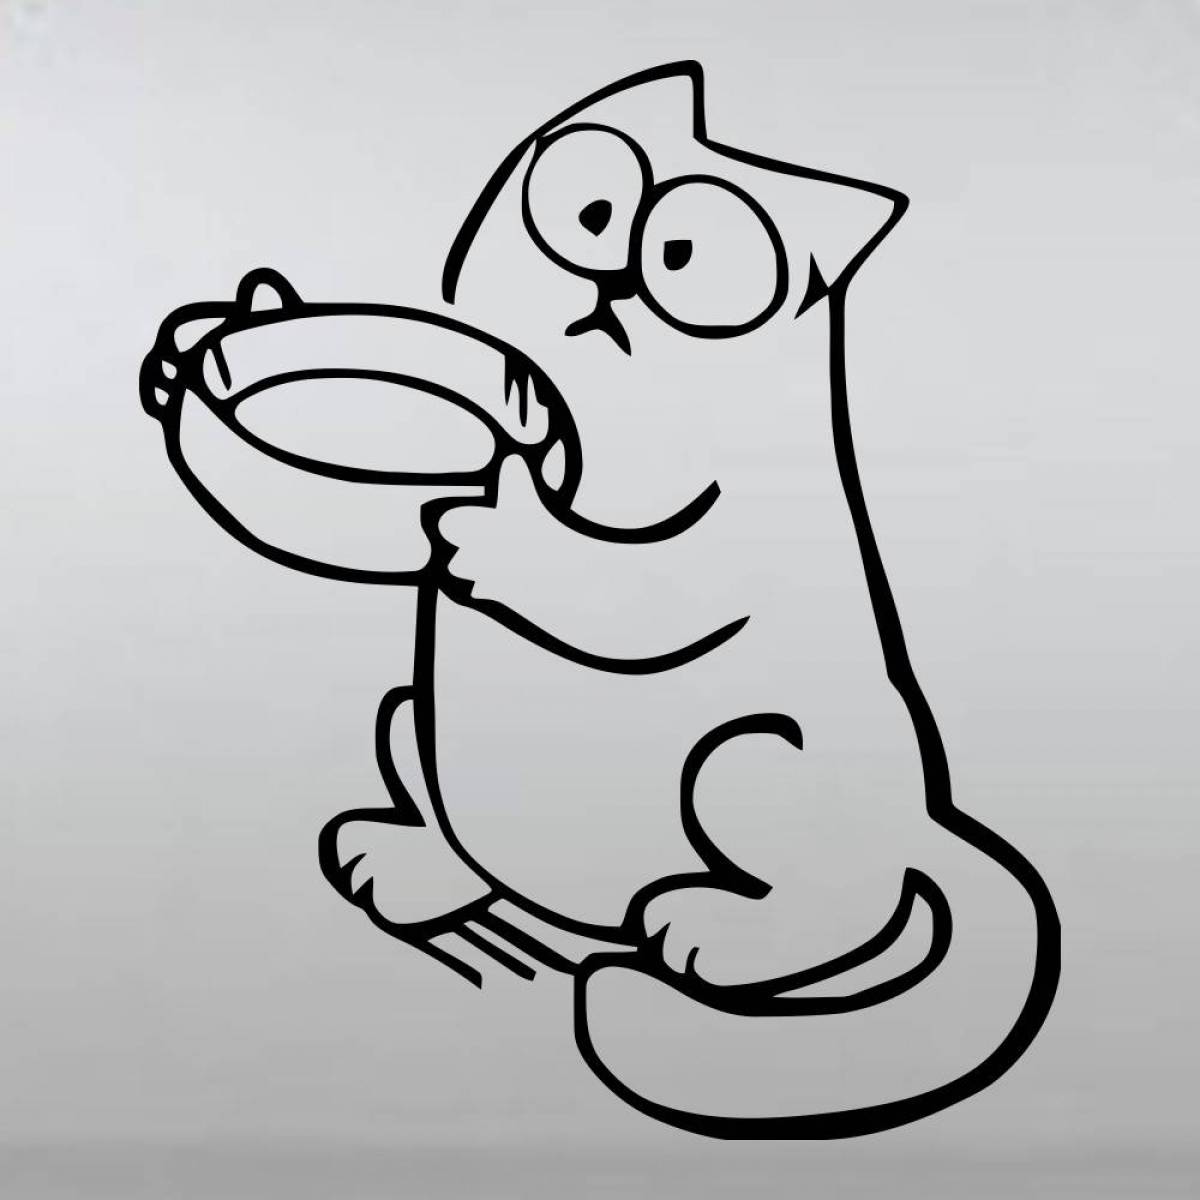 Charming cat coloring book